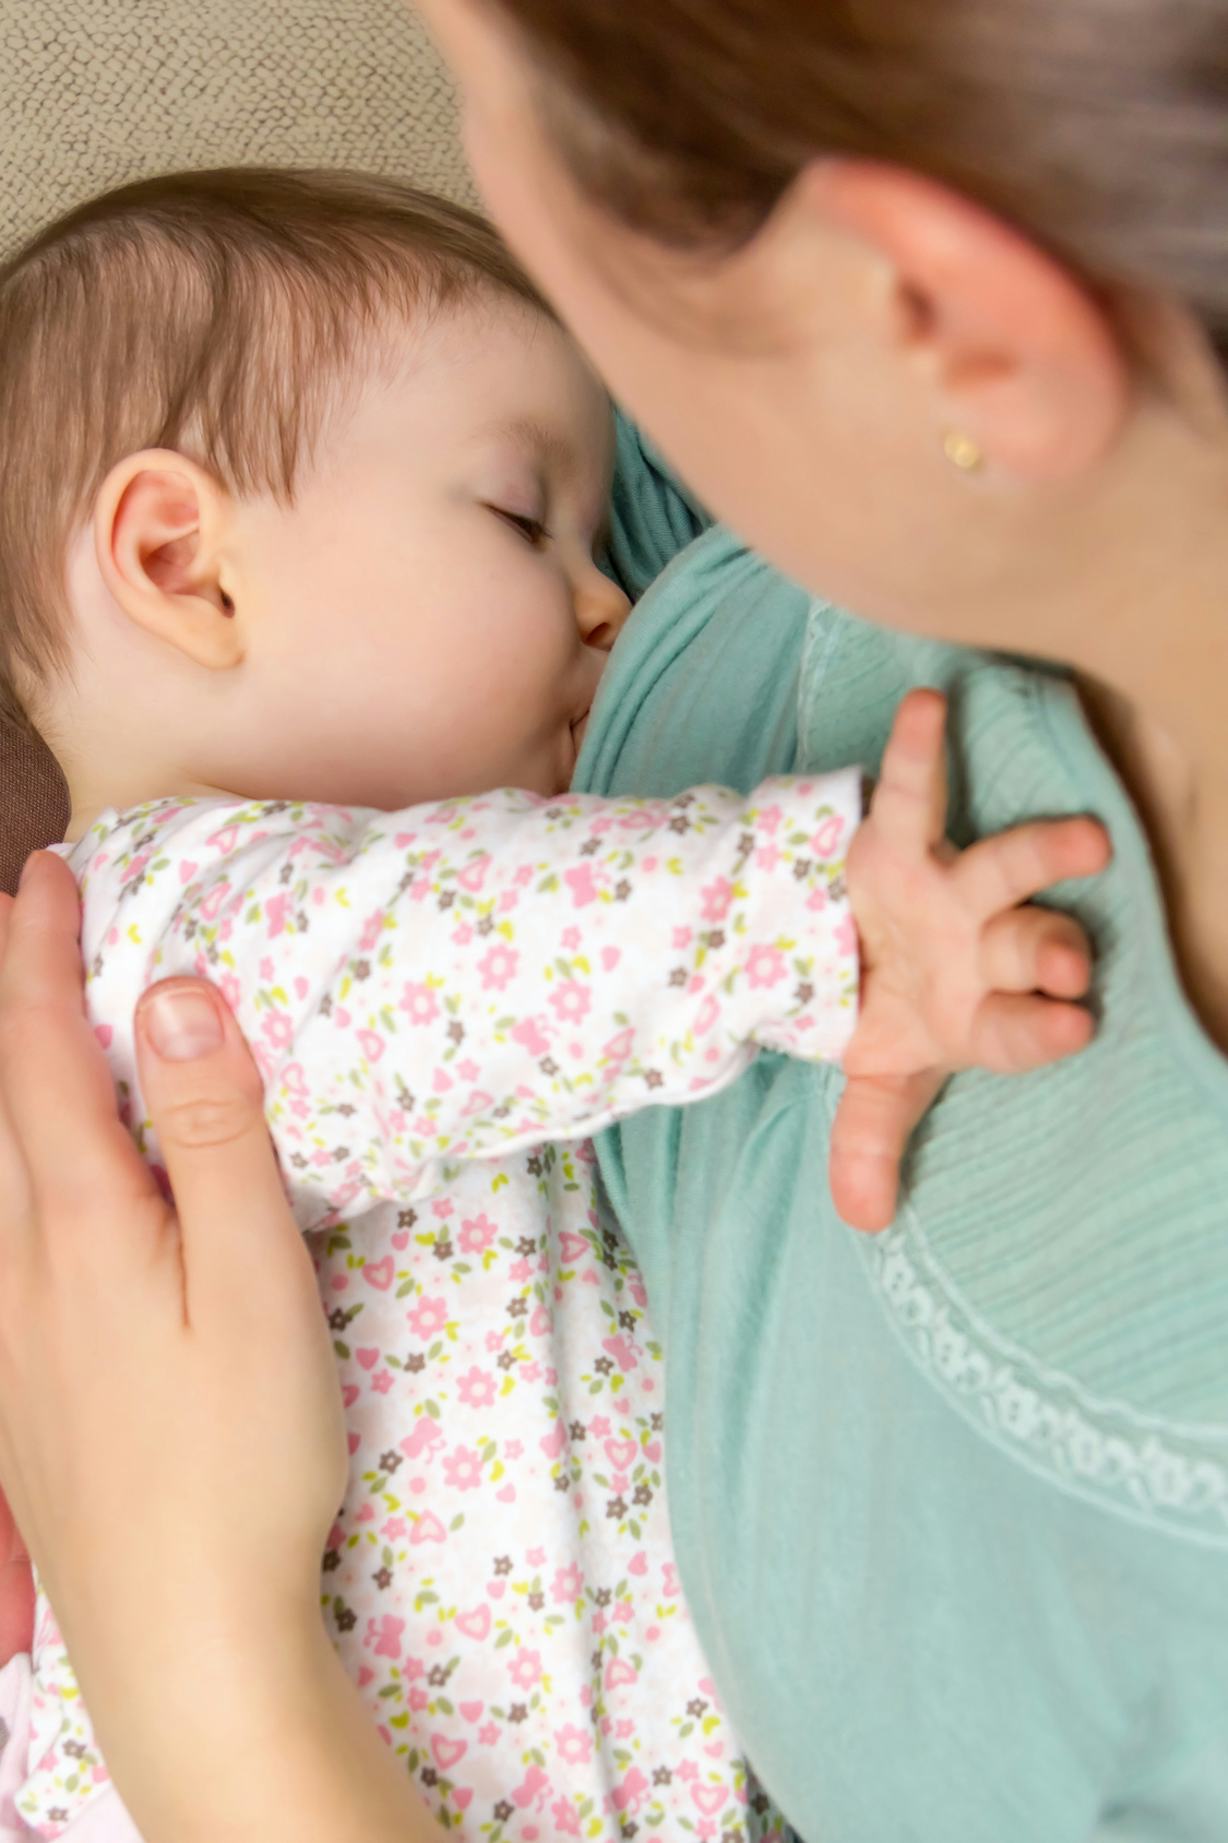 20 Moms Share Their Most Painful Breastfeeding Moments